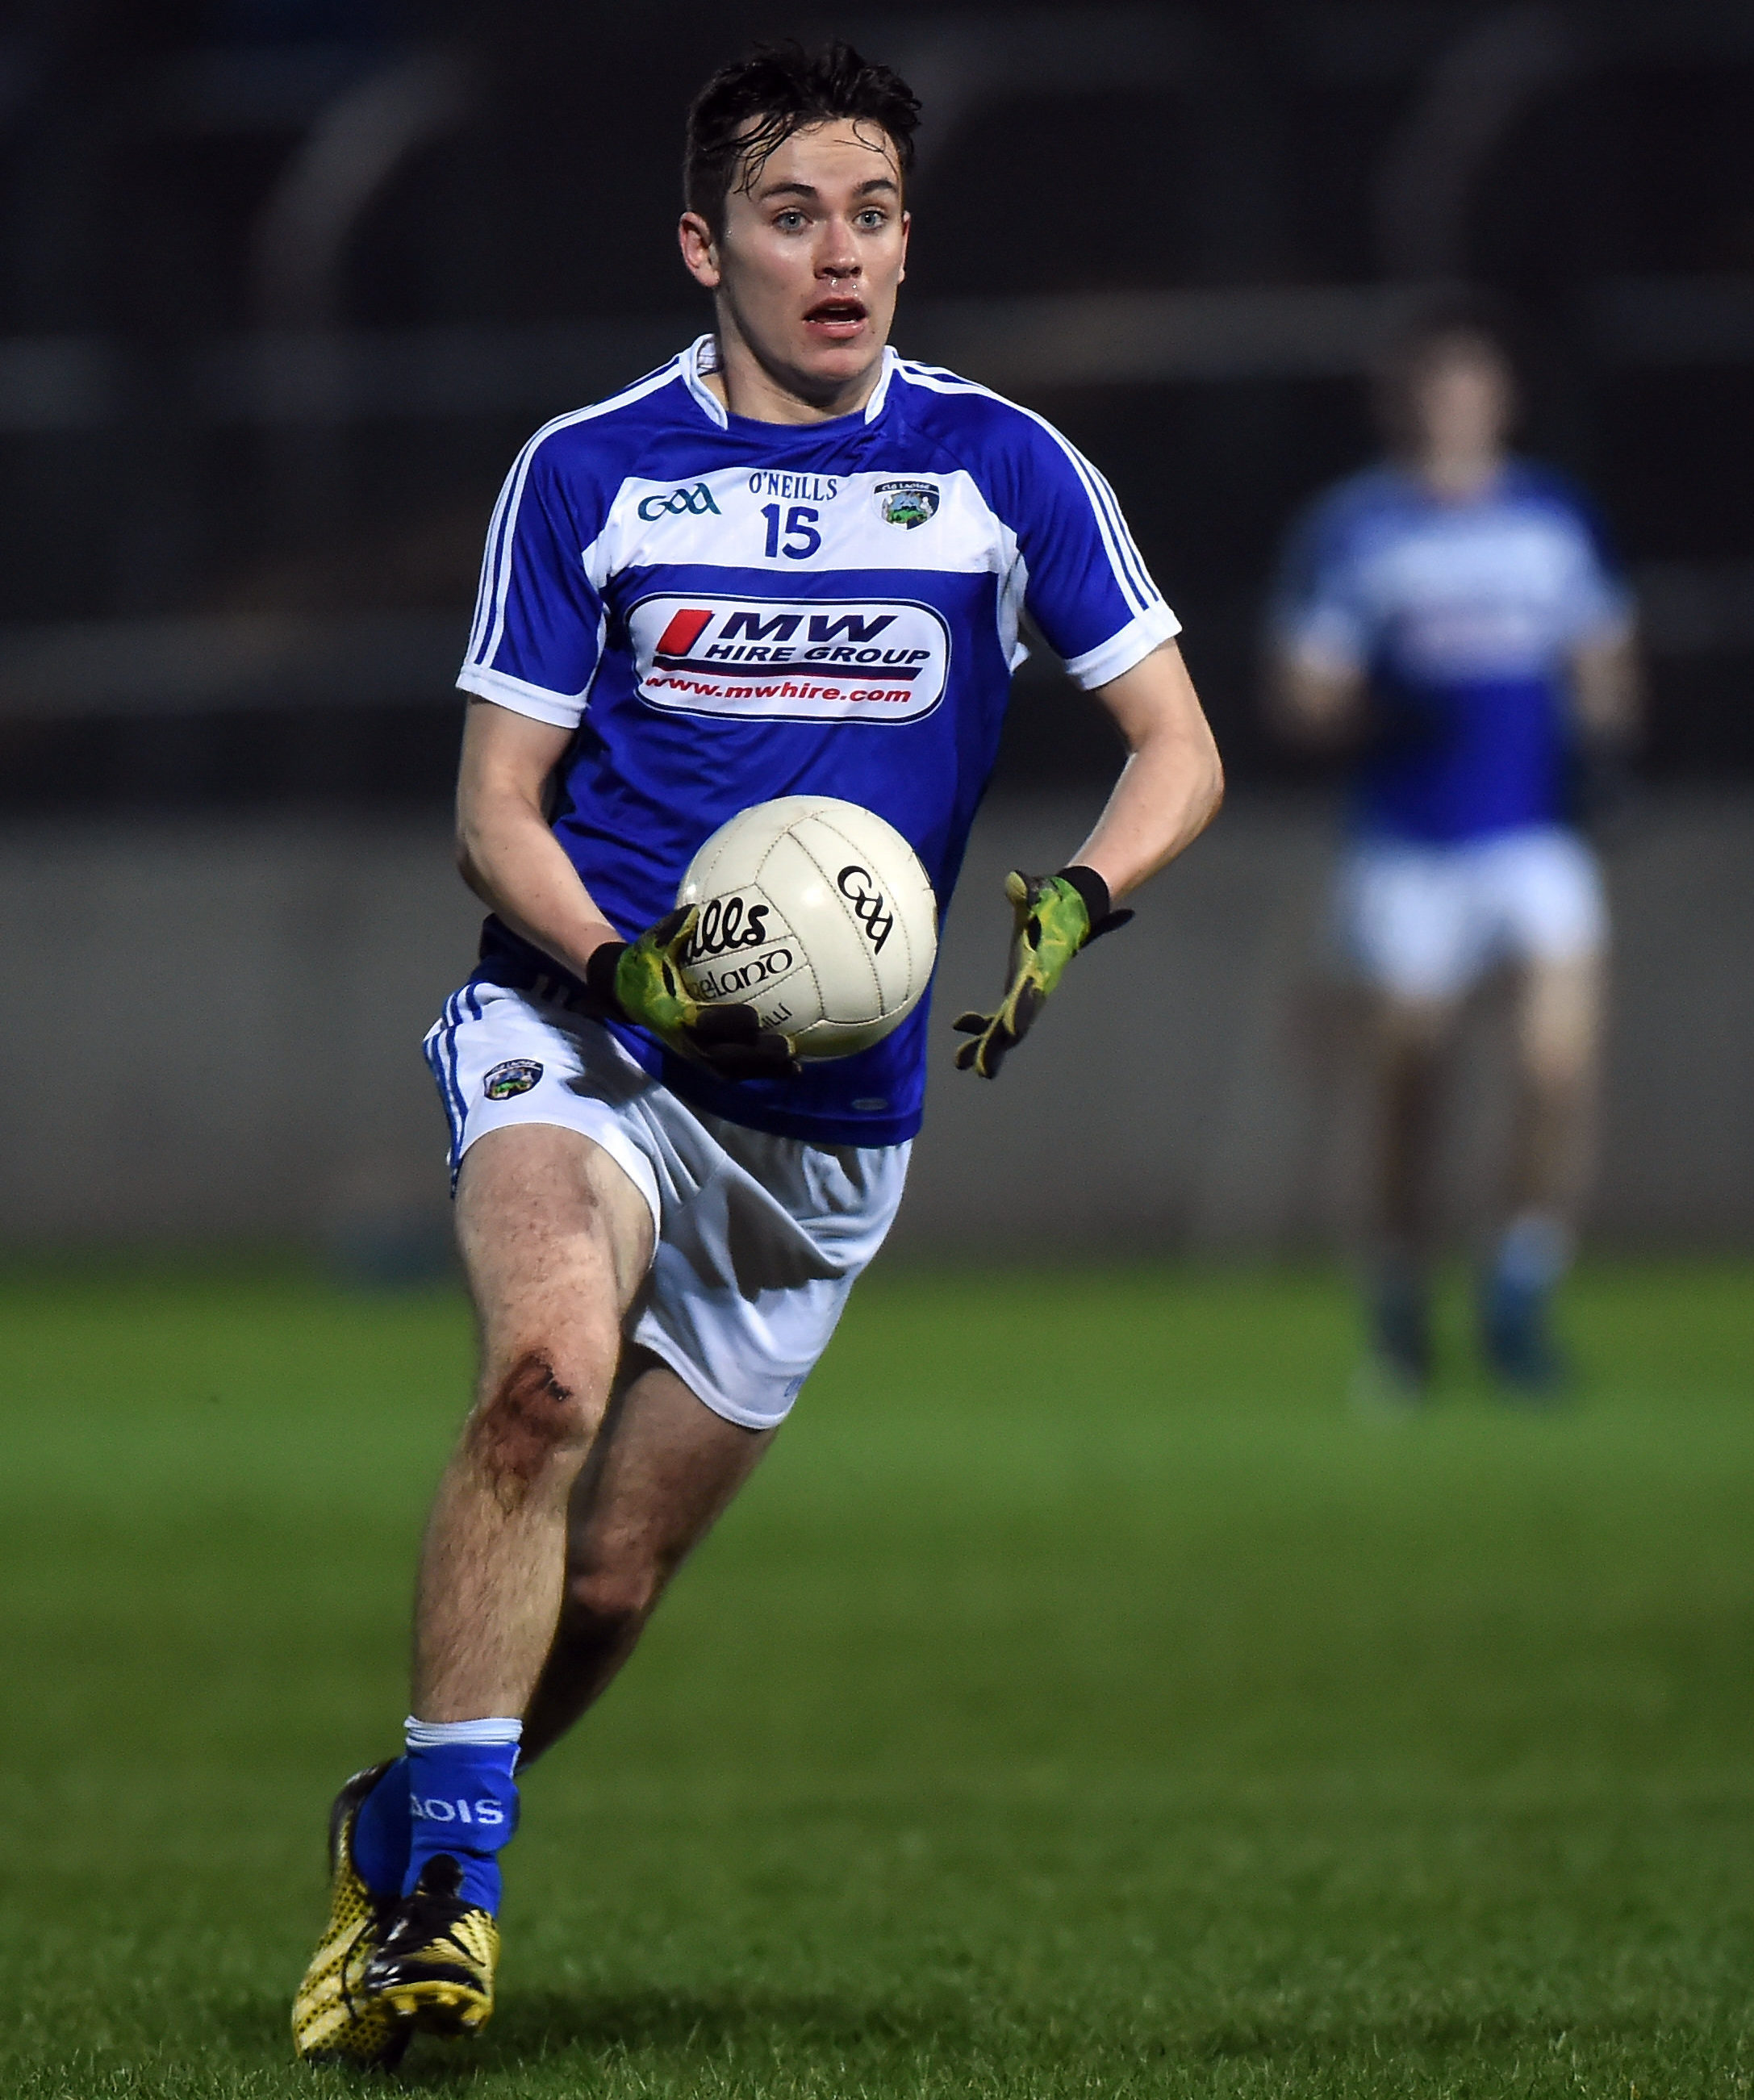 Brian Byrne played in the Leinster U-21 semi final for Laois